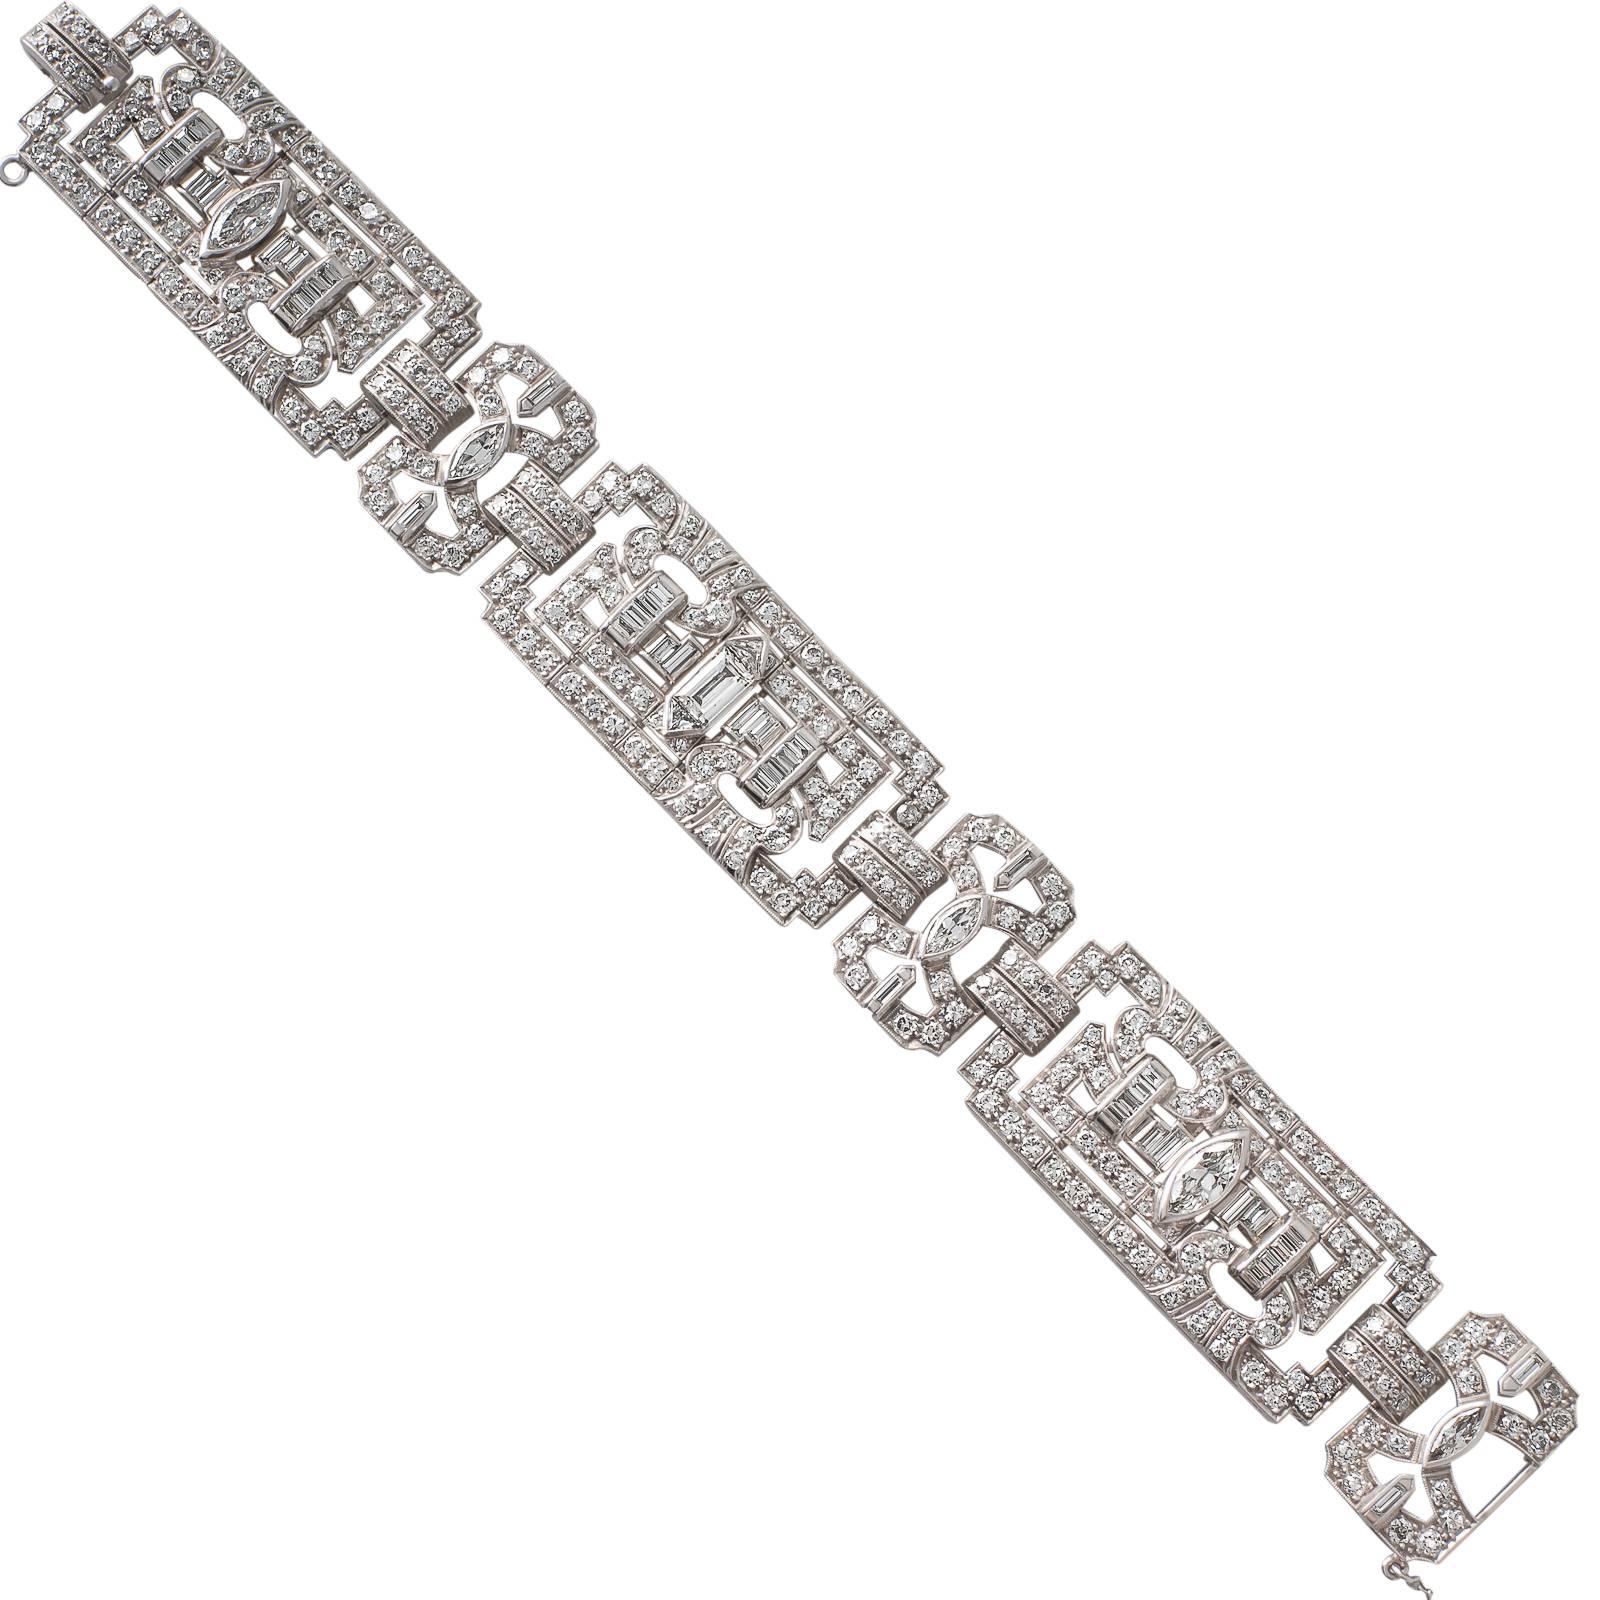 A platinum Art Deco bracelet of geometric design with articulated panel shaped links set with a combination of baguette, marquise, trilliant and round early brilliant cut diamonds fastening with a clip style catch and safety chain.
Total Estimated